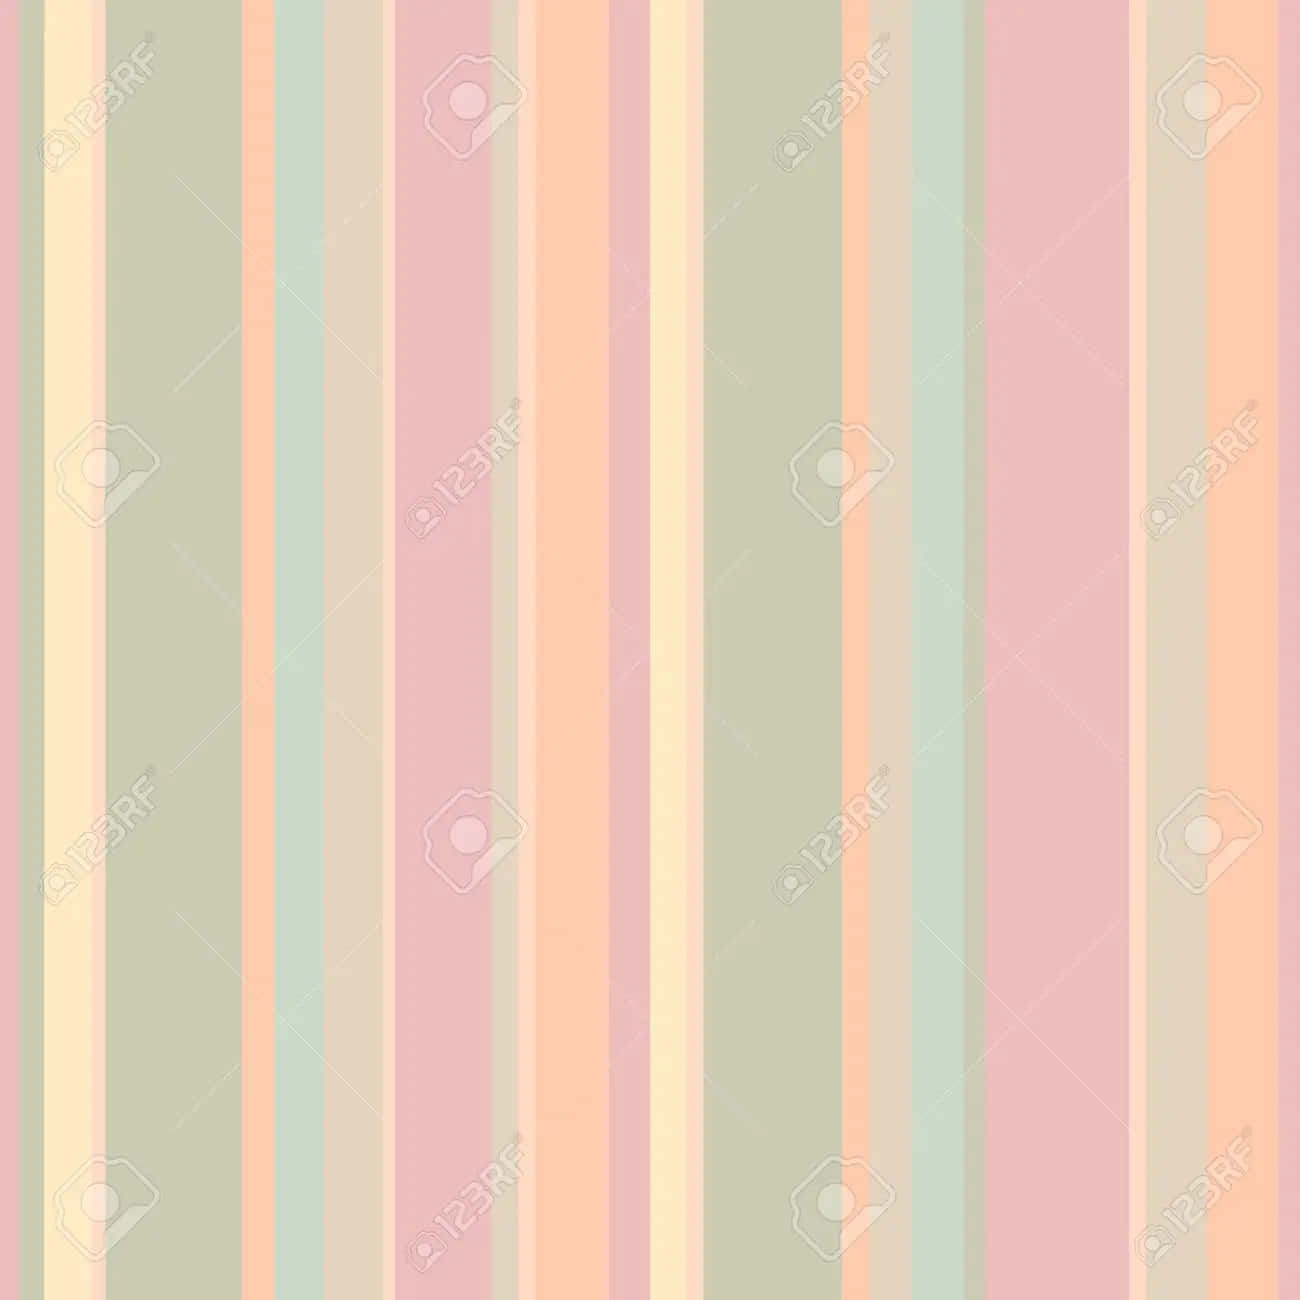 A Pink And Green Striped Wallpaper Background Stock Photo Wallpaper